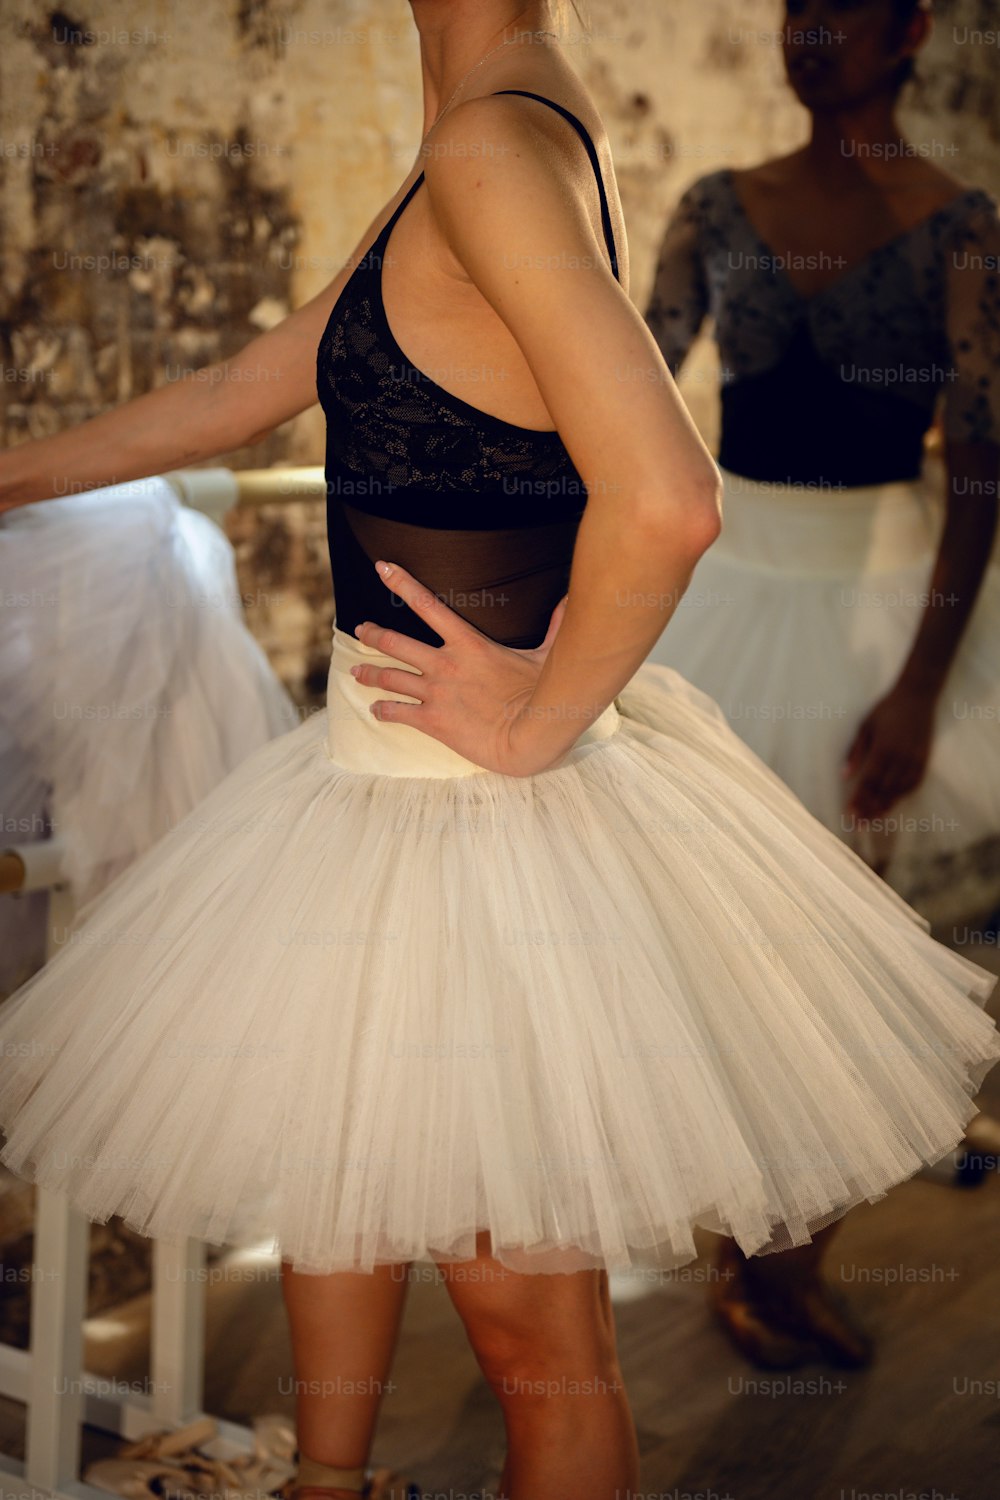 a woman wearing a white tutu and a black top